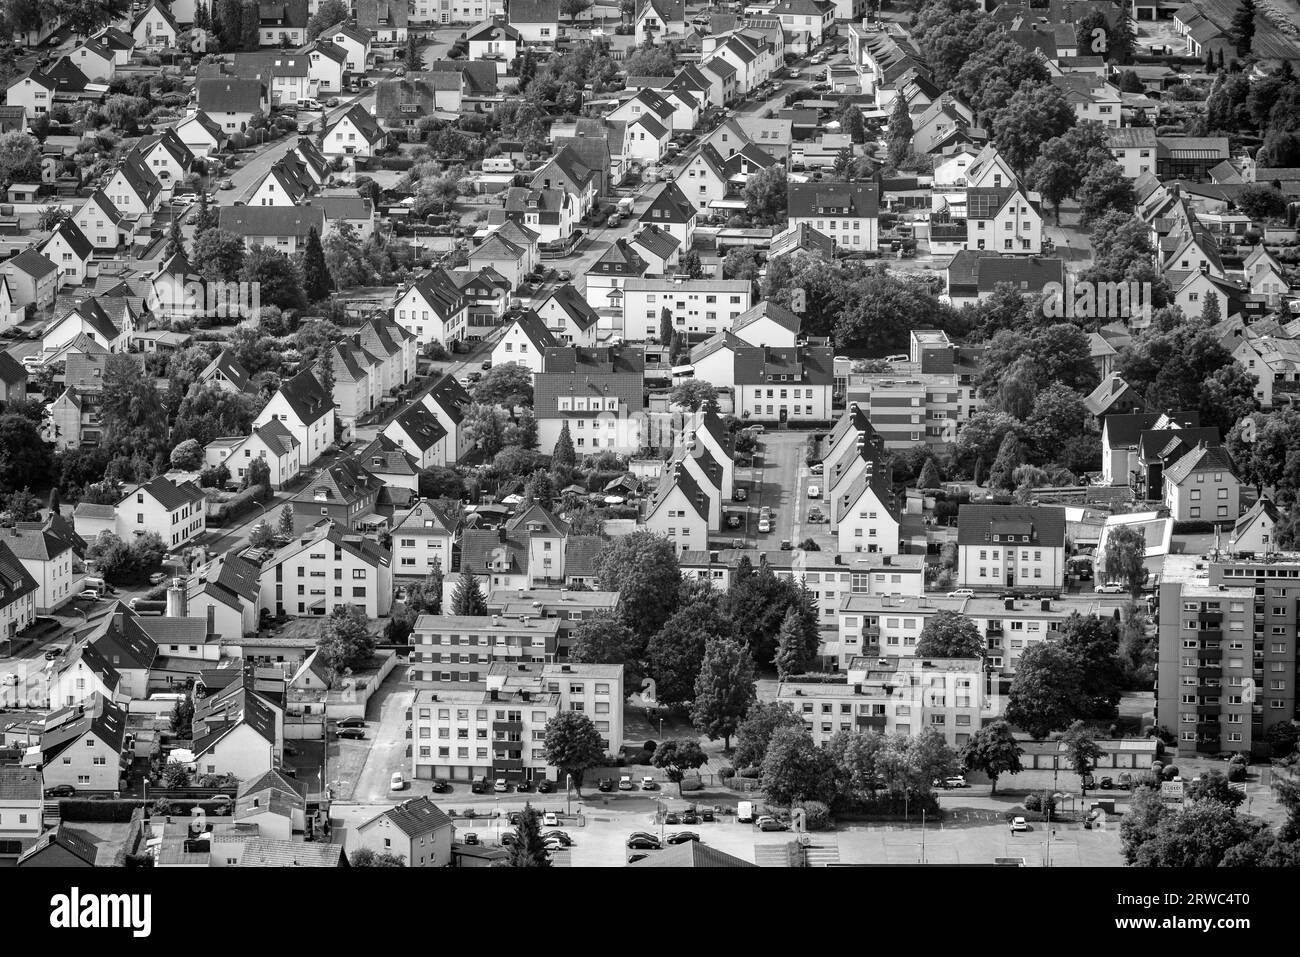 Ruhr area Black and White Stock Photos & Images - Alamy